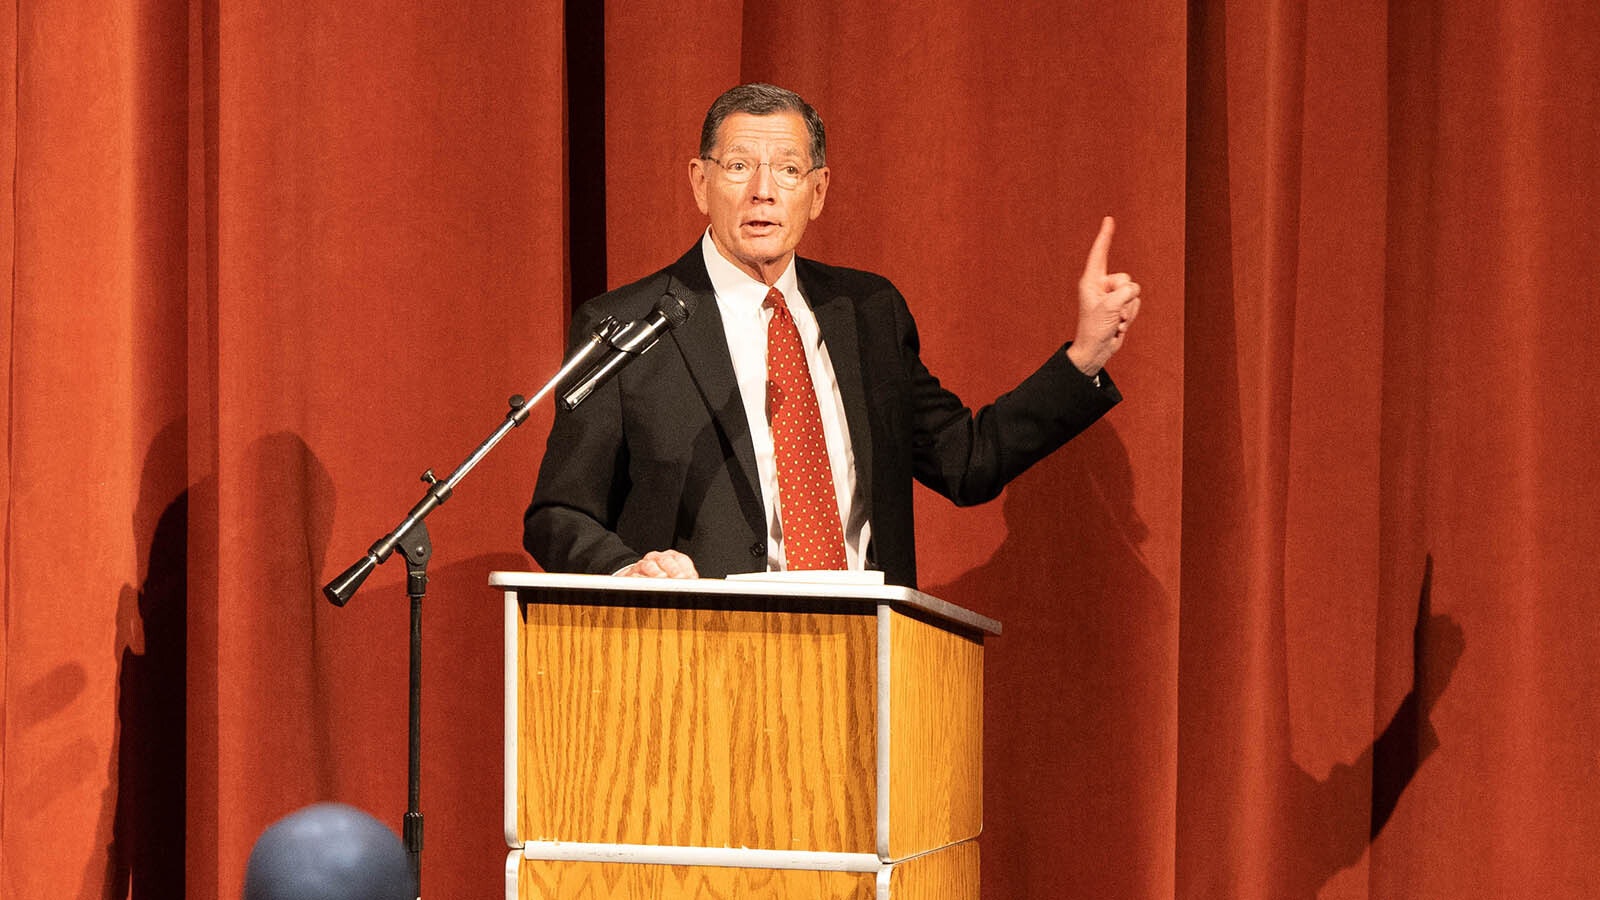 U.S. Sen. John Barrasso said Joe Arnold's work ethic and dedication are legendary and he read an account of Arnold's life and service into the U.S. Congressional Record.